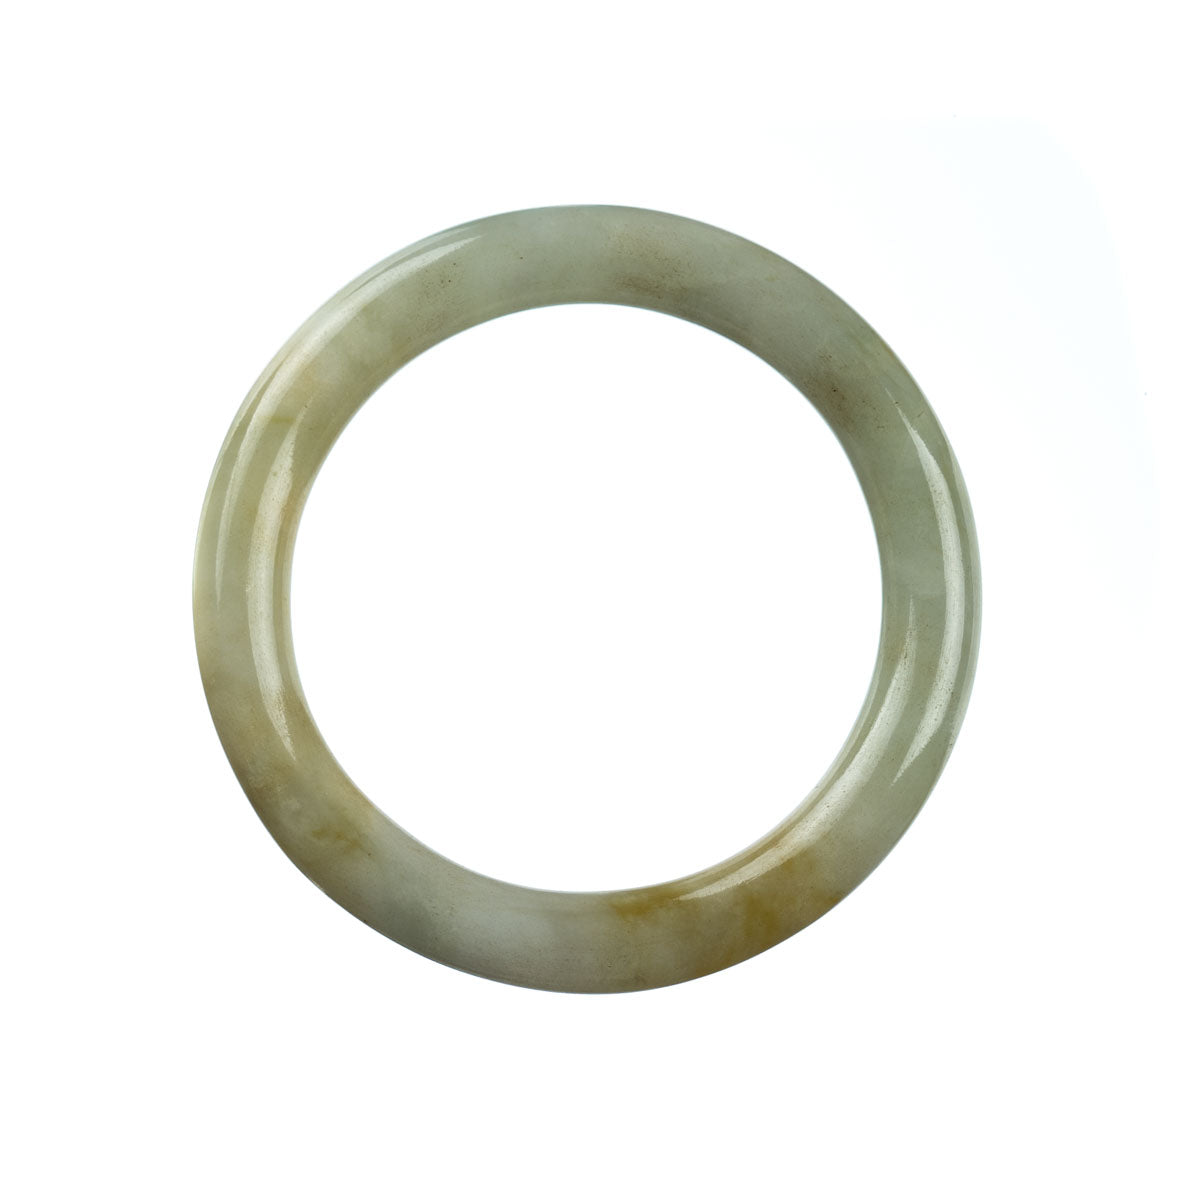 A round pale green jadeite bangle with a smooth and polished surface, measuring 57mm in diameter. The bangle is made of genuine Grade A jadeite, displaying a beautiful and natural shade of green. Designed by MAYS.